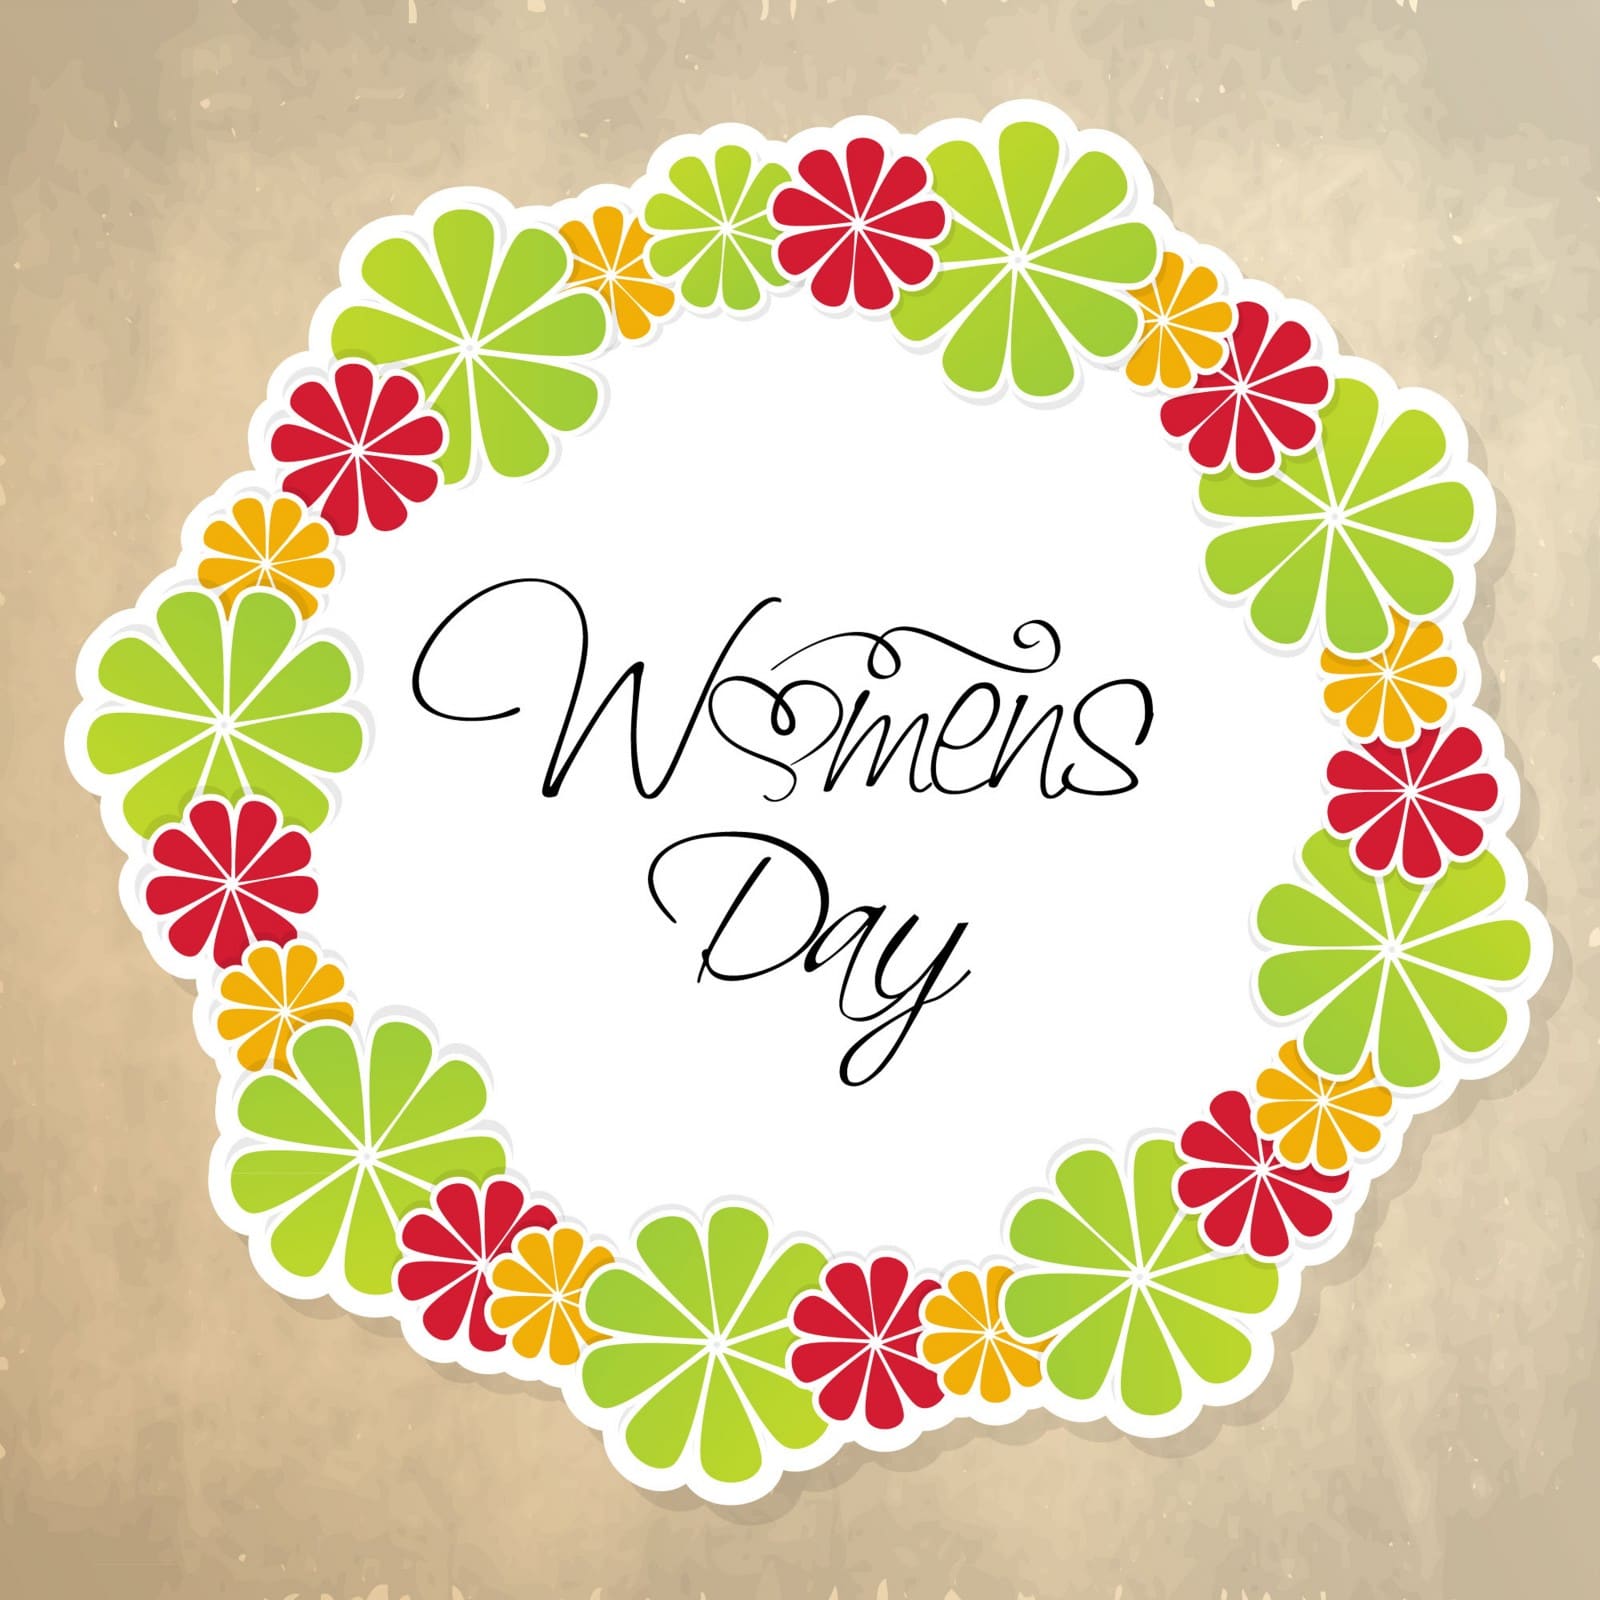 Women’s Day 2017 Greeting Cards